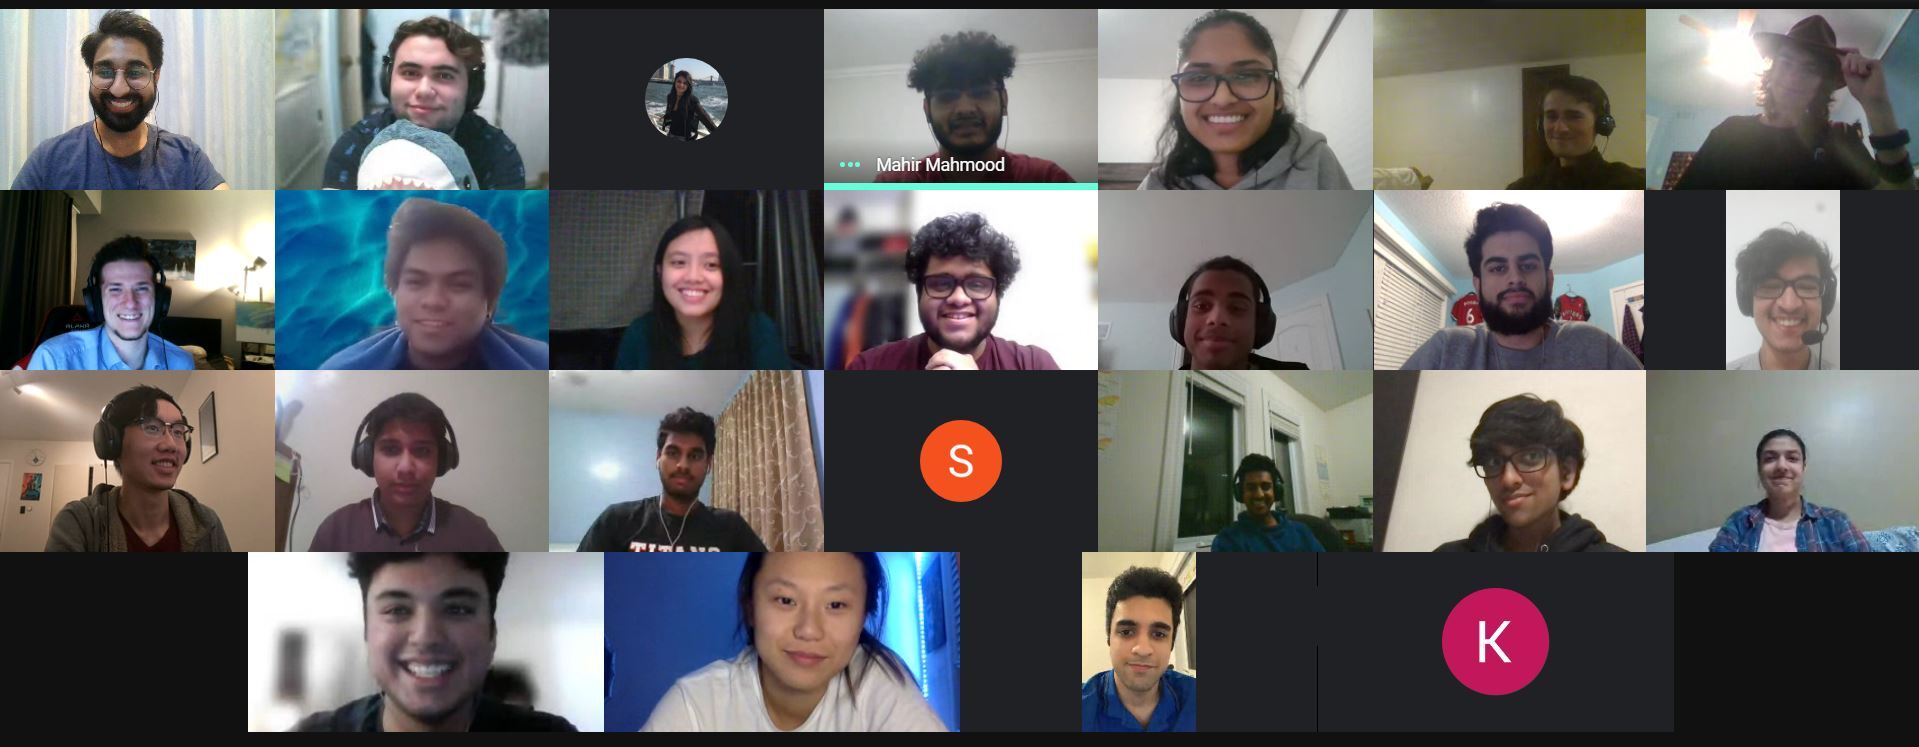 A screenshot of a Ryerson Propulsion Group Zoom session